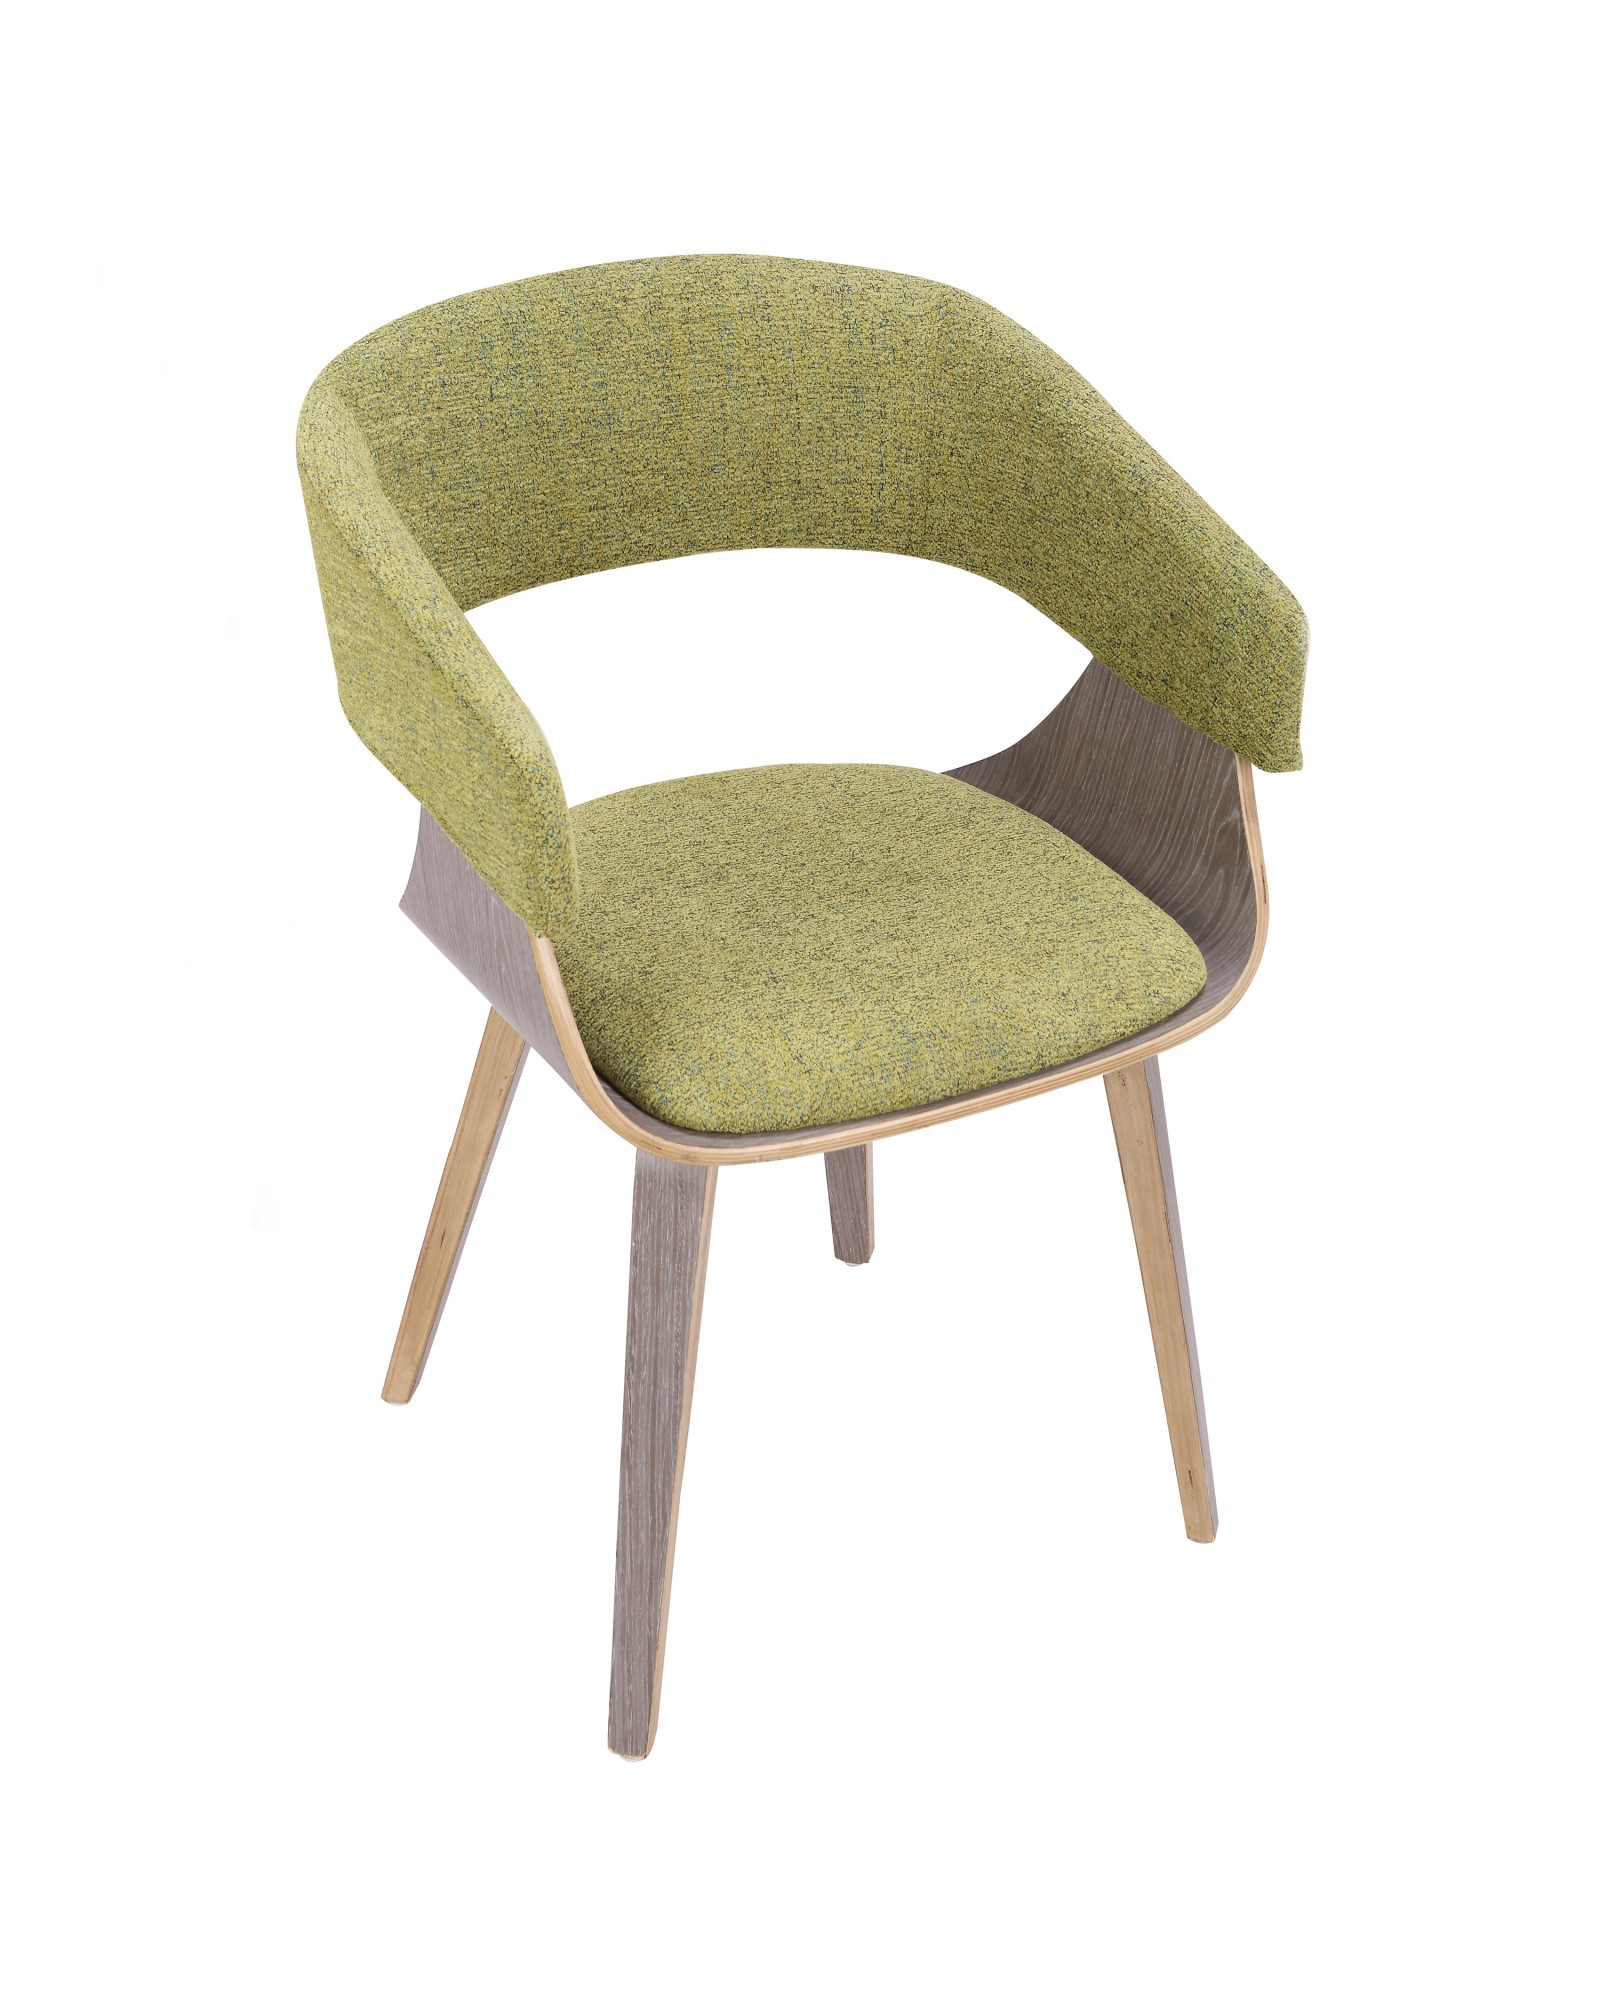 Elisa Mid-Century Modern Dining/Accent Chair in Light Grey Wood and Green Fabric